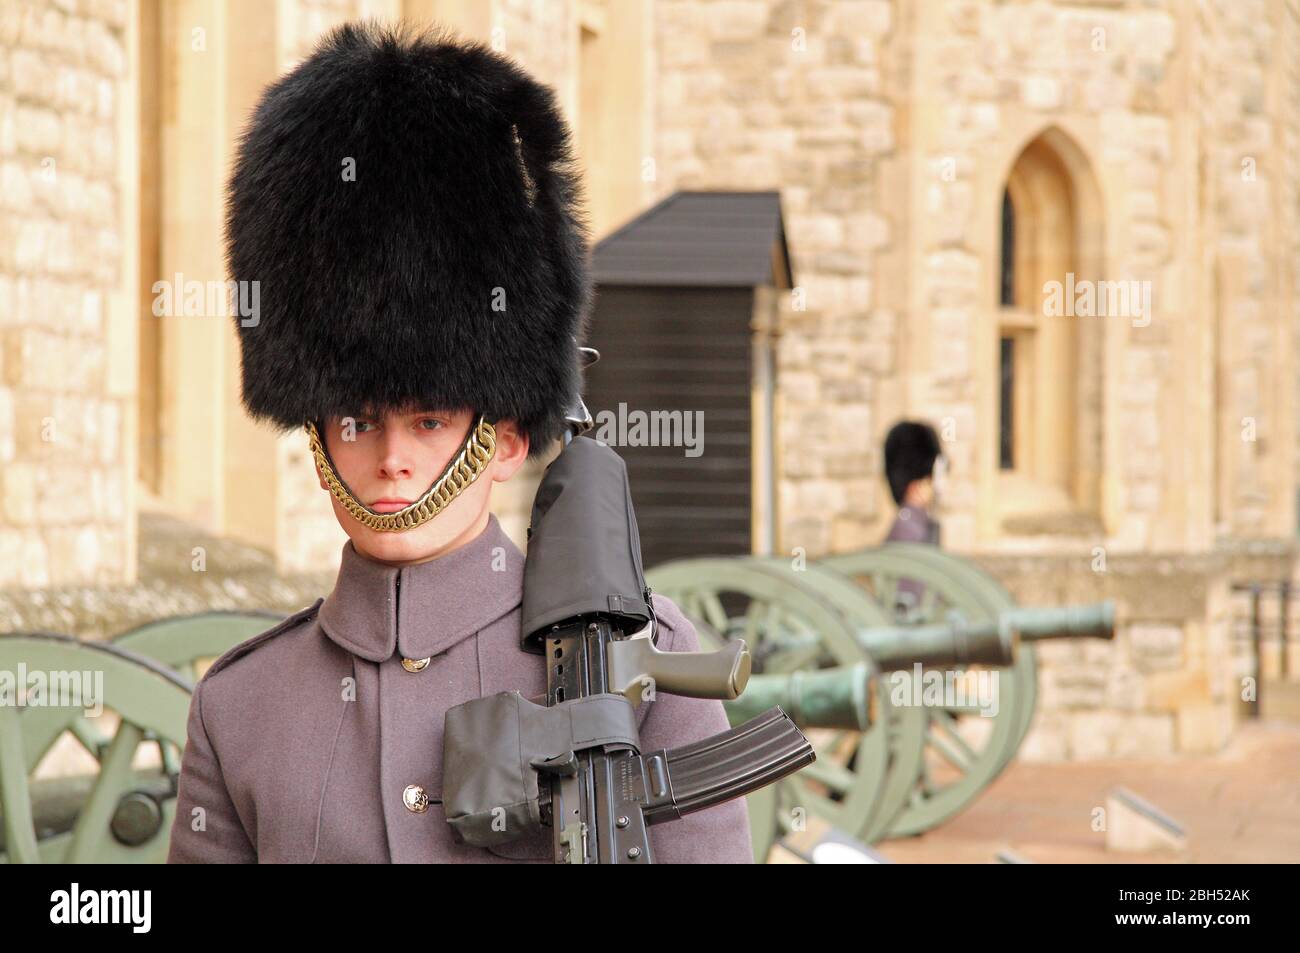 Members of the Tower Guard protect the Jewel House, which houses the British Crown Jewels in the Tower of London complex March 13, 2020 in London, UK Stock Photo